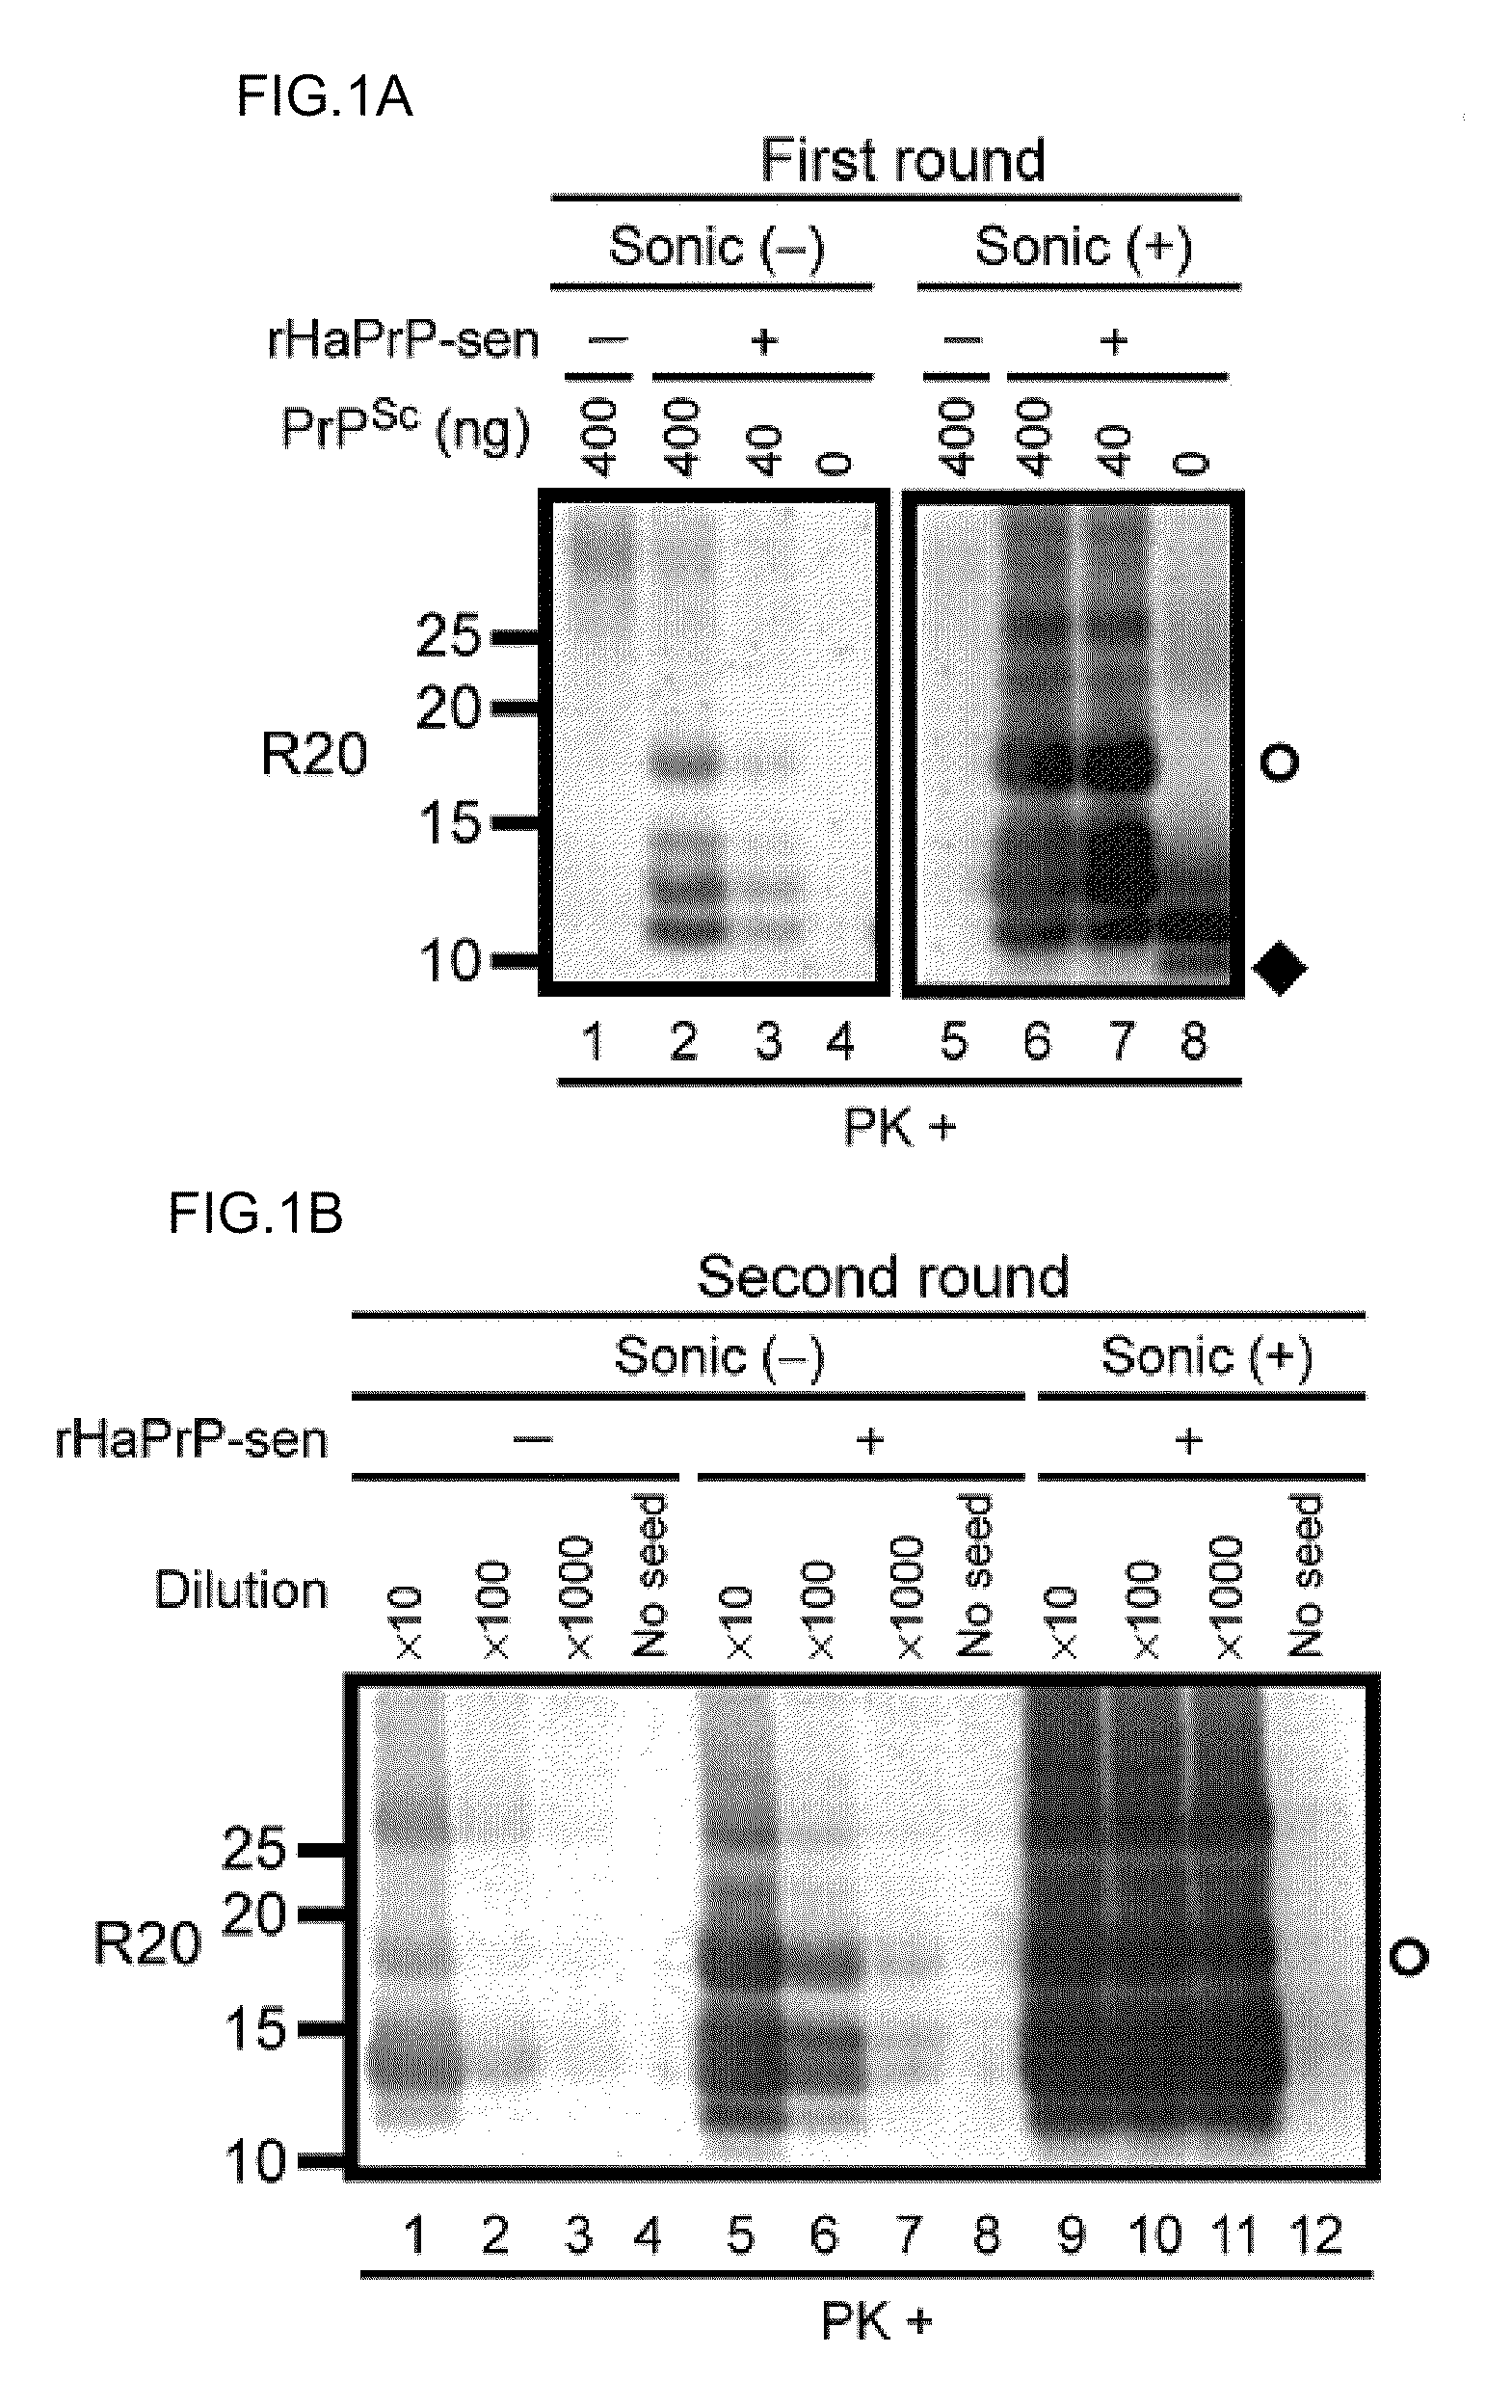 Detection of infectious prion protein by seeded conversion of recombinant prion protein